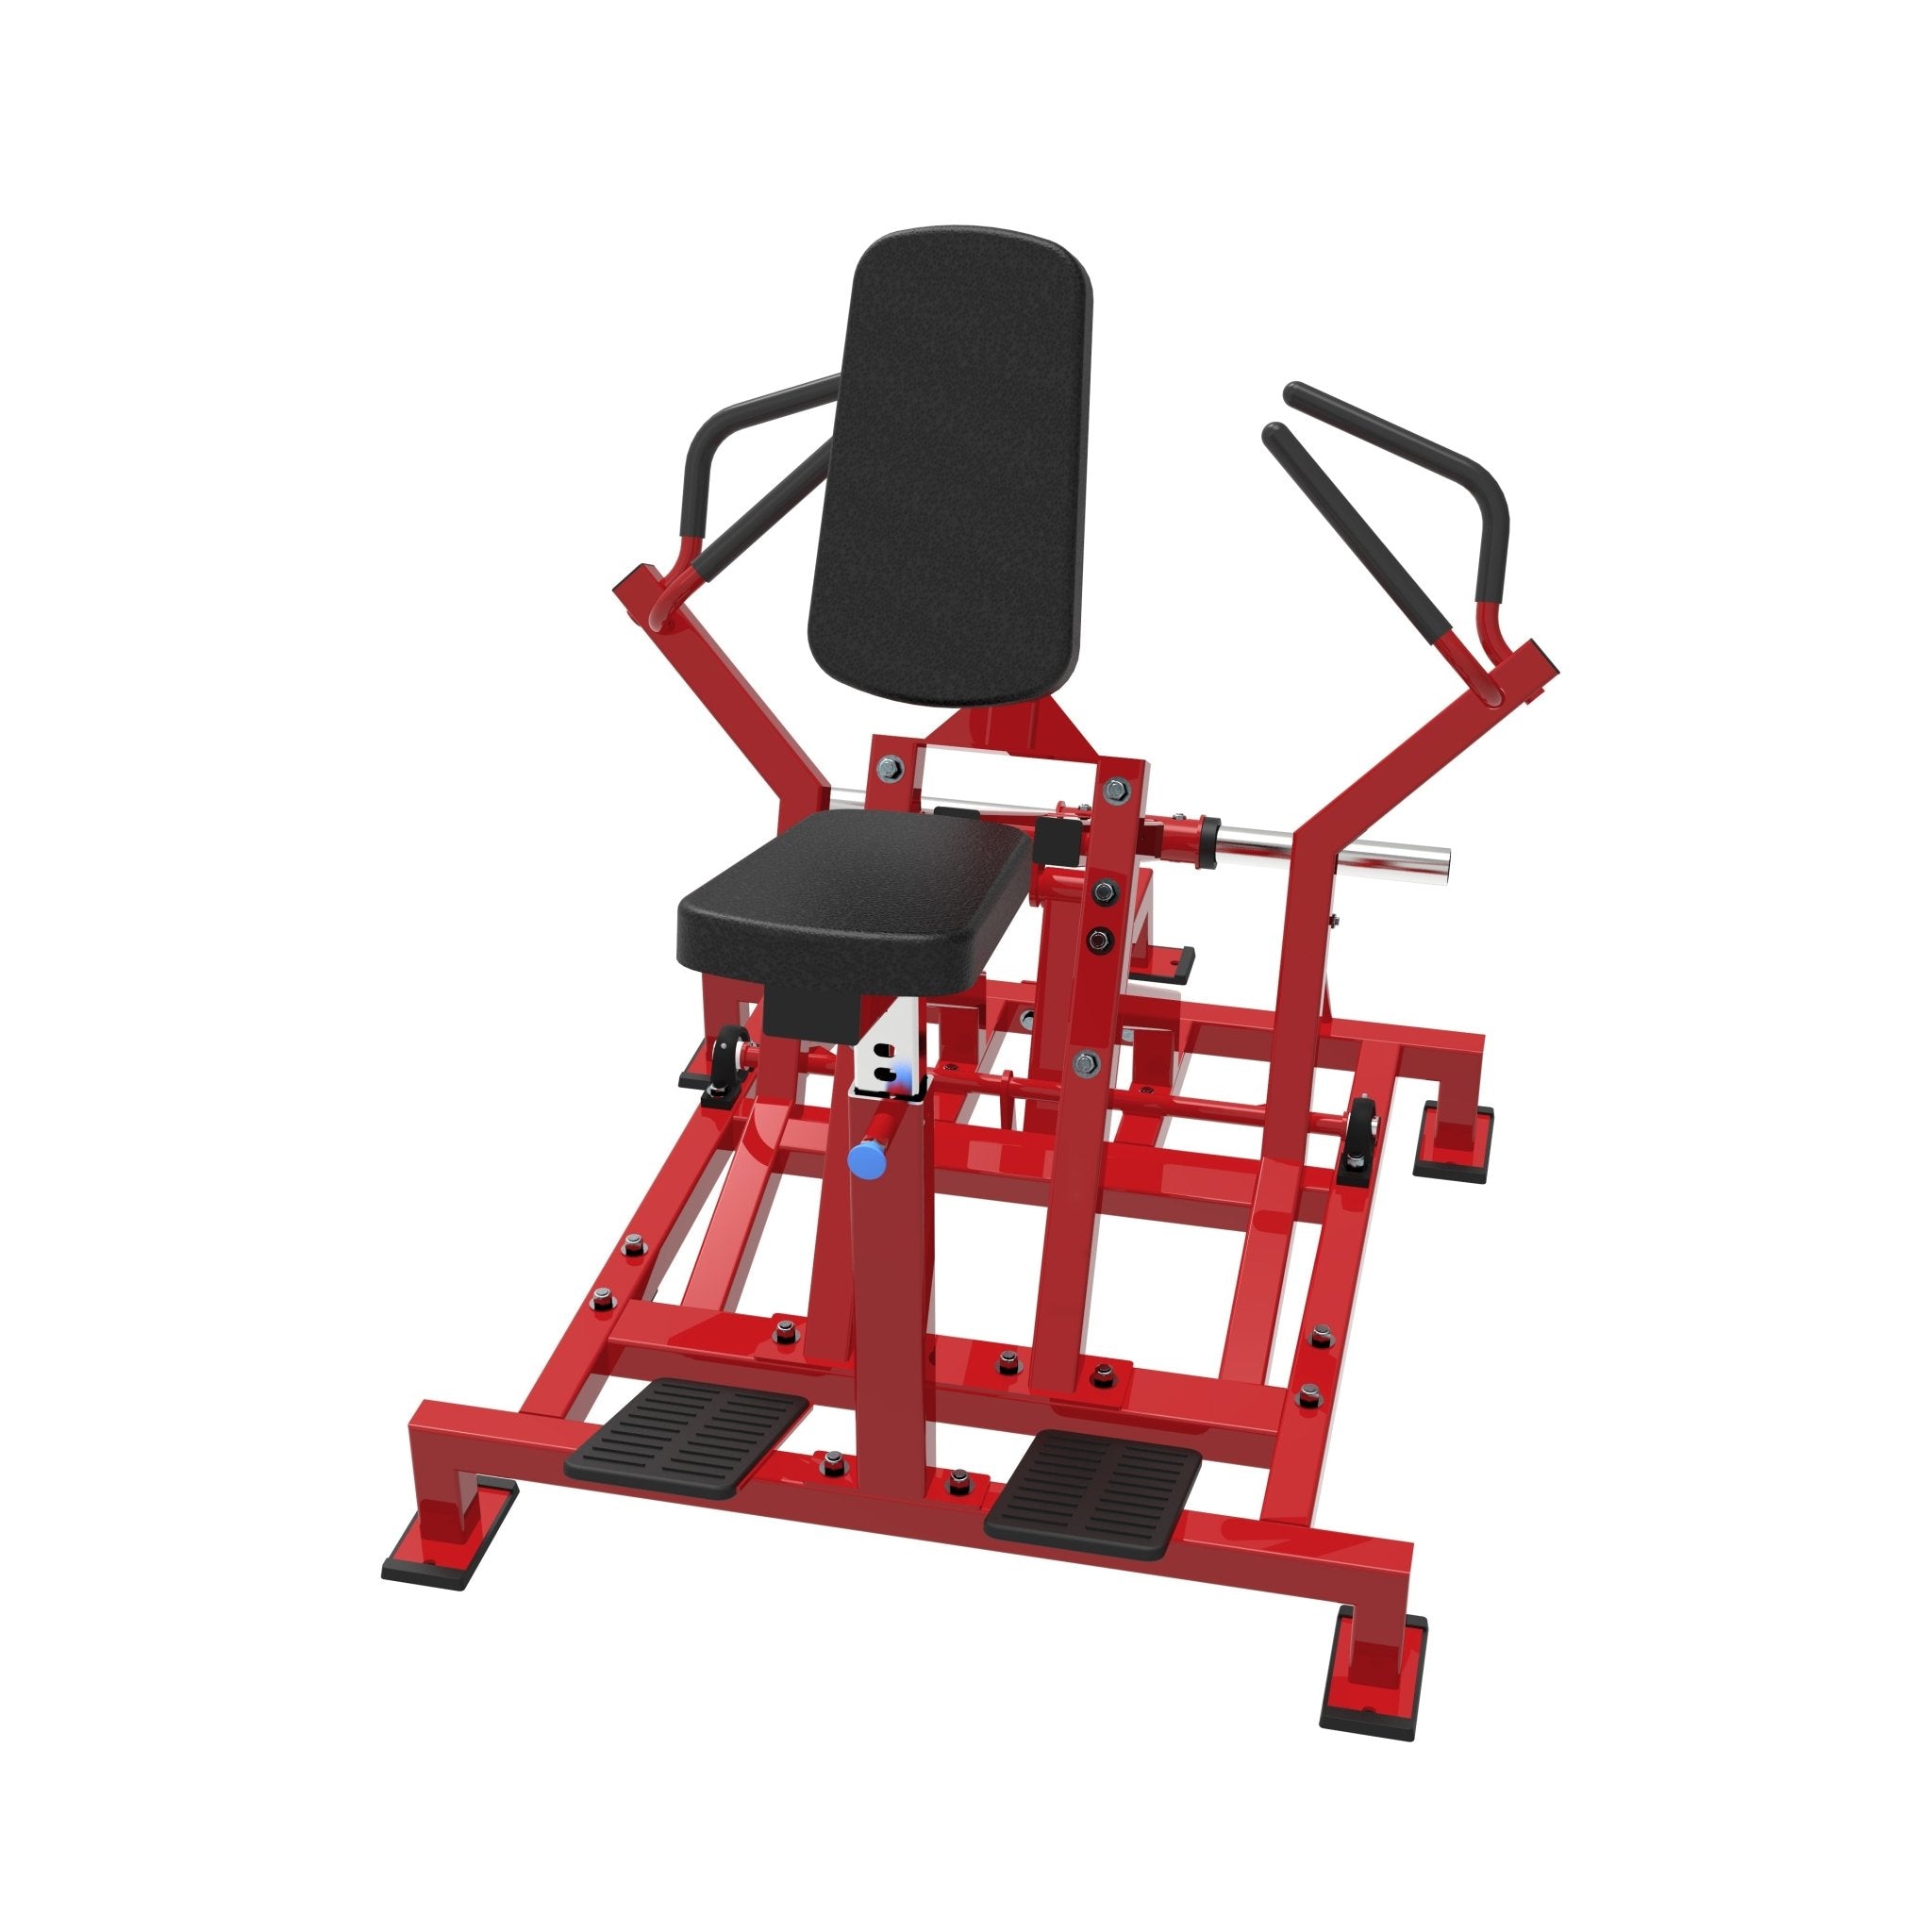 Seated Row | Dstars Gym Equipment Philippines